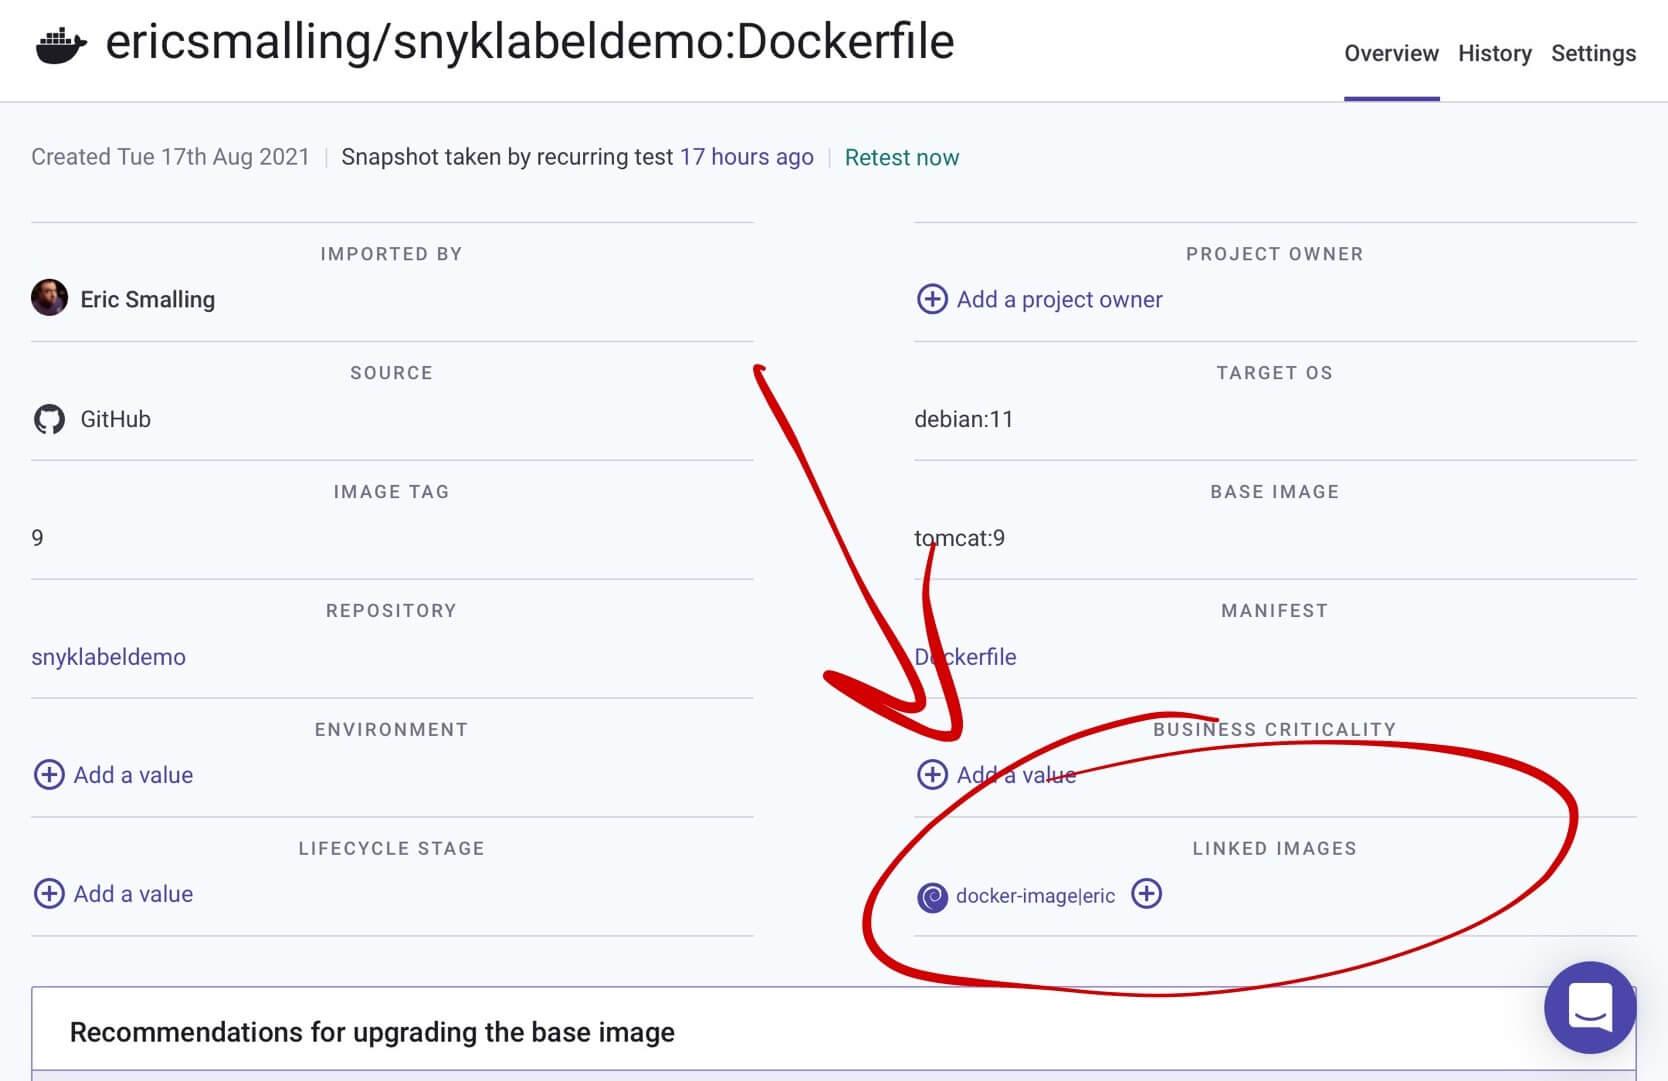 wordpress-sync/blog-container-annotations-xref